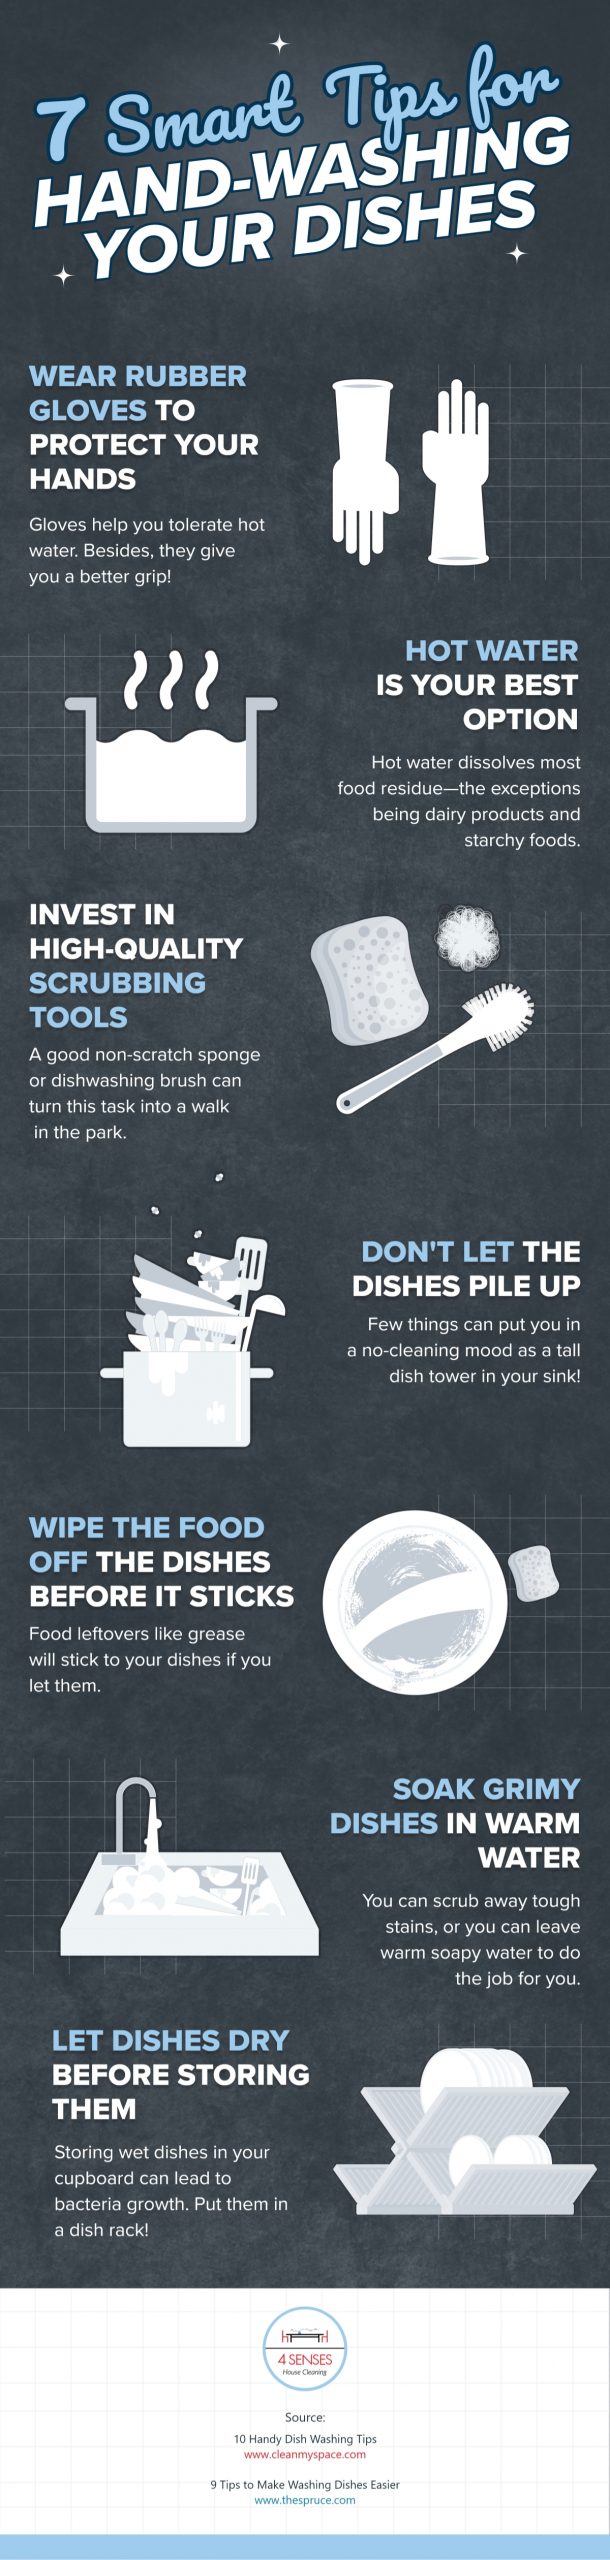 https://4senseshousecleaning.com/wp-content/uploads/2021/12/4-Senses-House-Cleaning-7-Smart-Tips-For-Hand-Washing-Your-Dishes-scaled.jpg